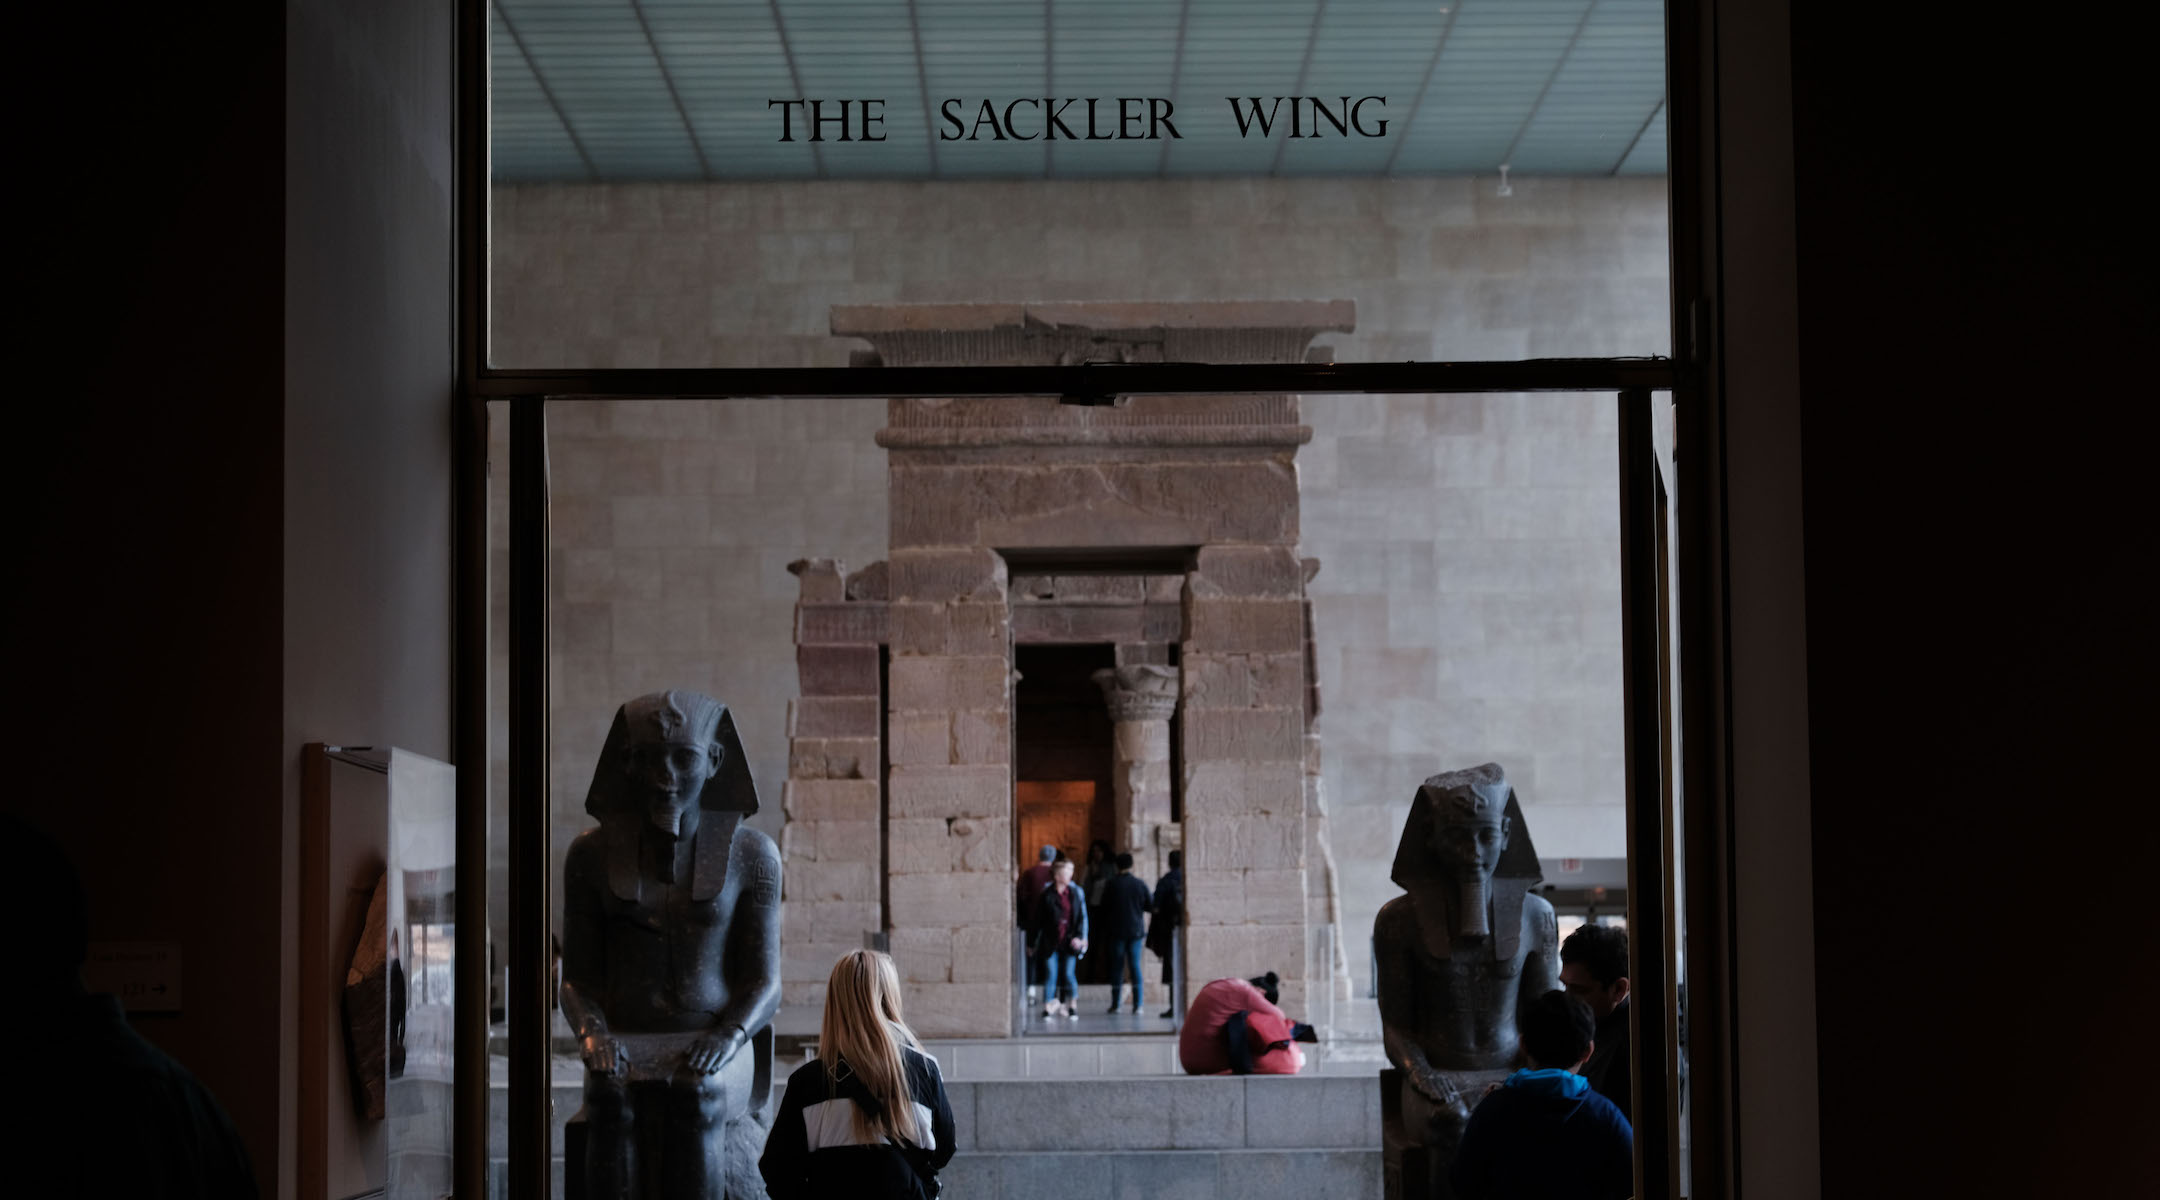 The Sackler name was on a number of institutions, including this wing at the Metropolitan Museum of Art in New York City that hours the famed Egyptian Temple of Dendur. (Spencer Platt/Getty Images)